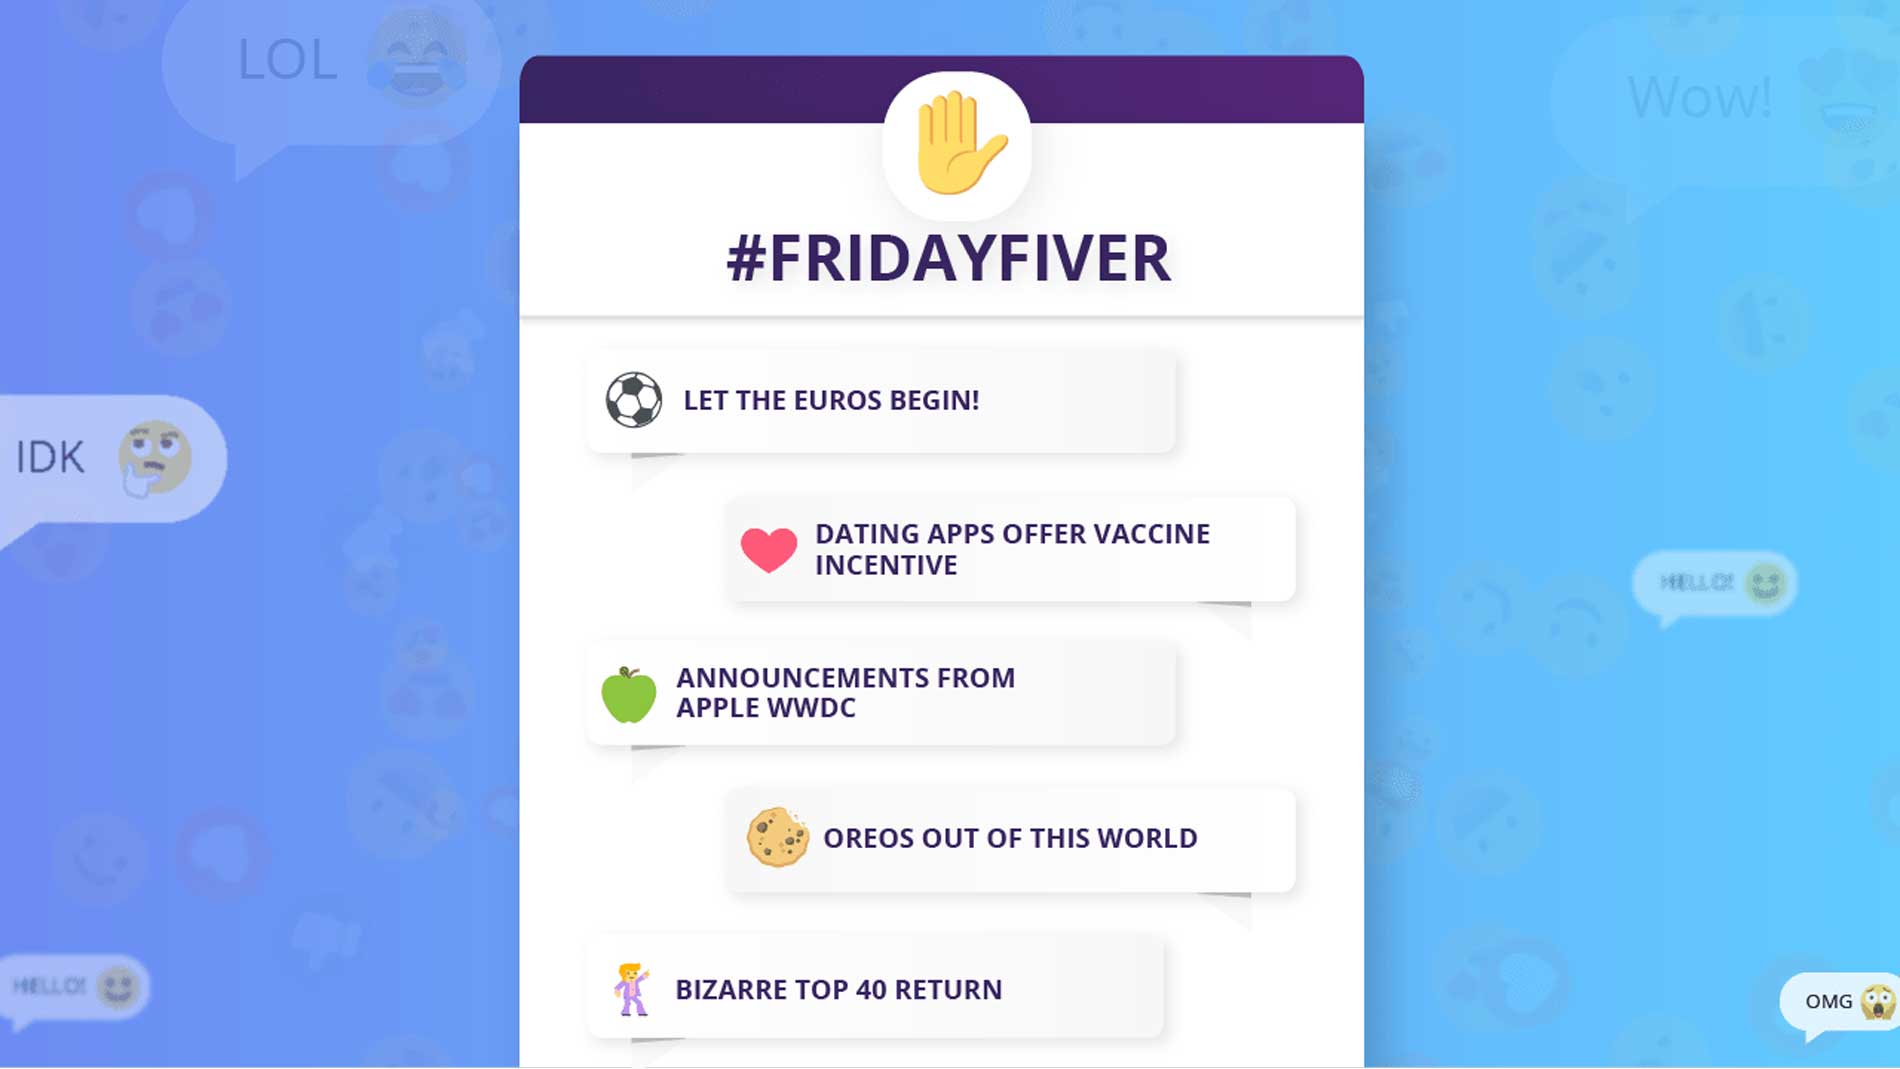 #FridayFiver ✋ – Sunny Days At Last!